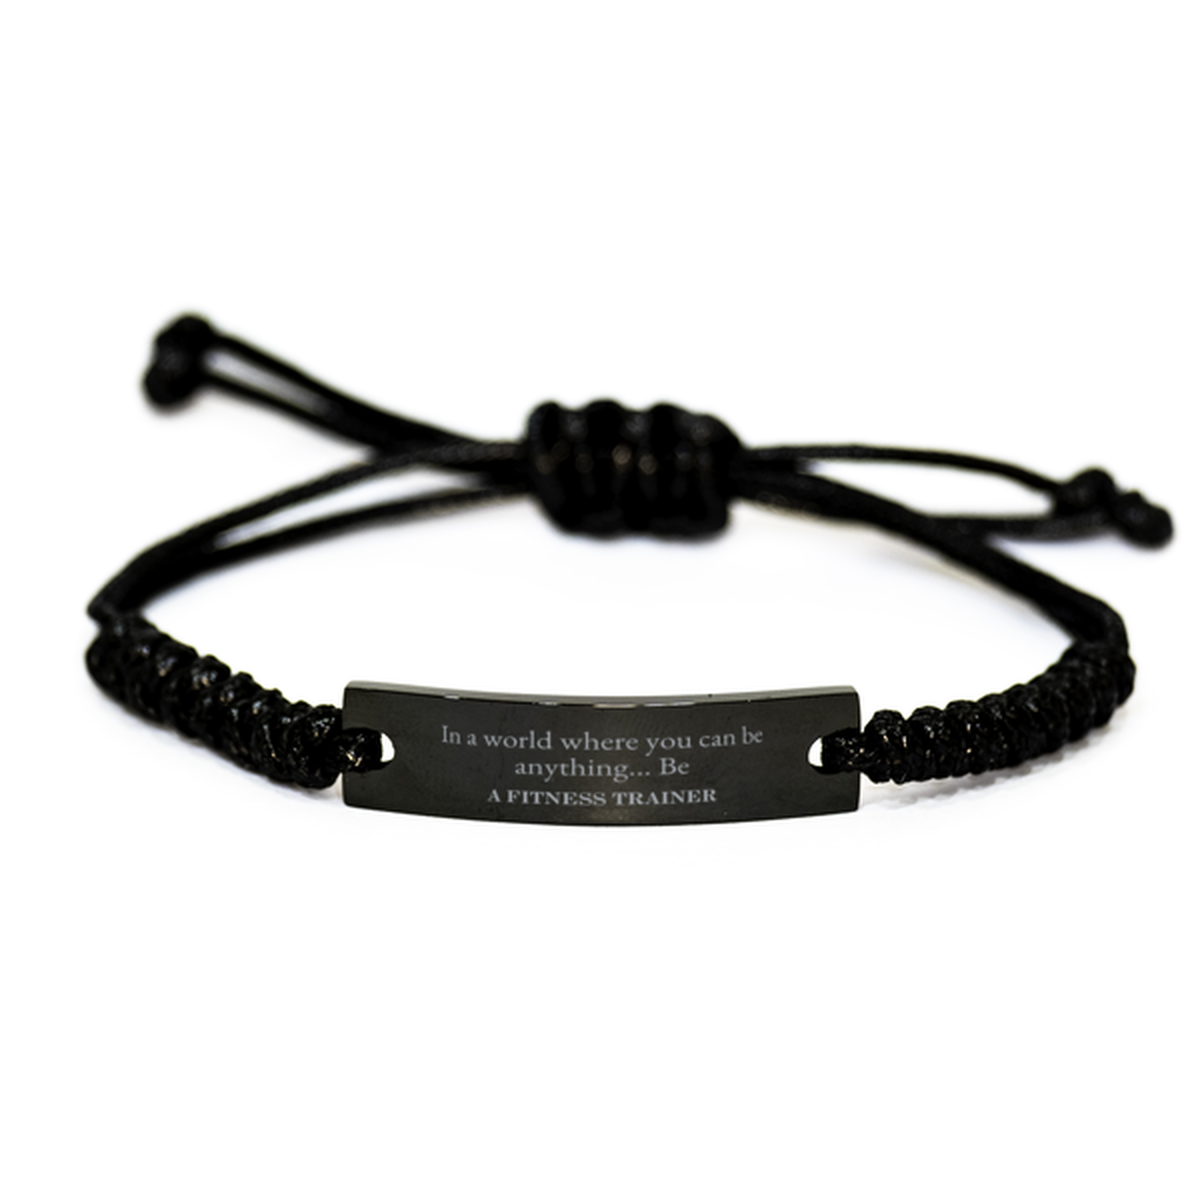 Gifts for Fitness Trainer, In a world where you can be anything, Appreciation Birthday Black Rope Bracelet for Men, Women, Friends, Coworkers